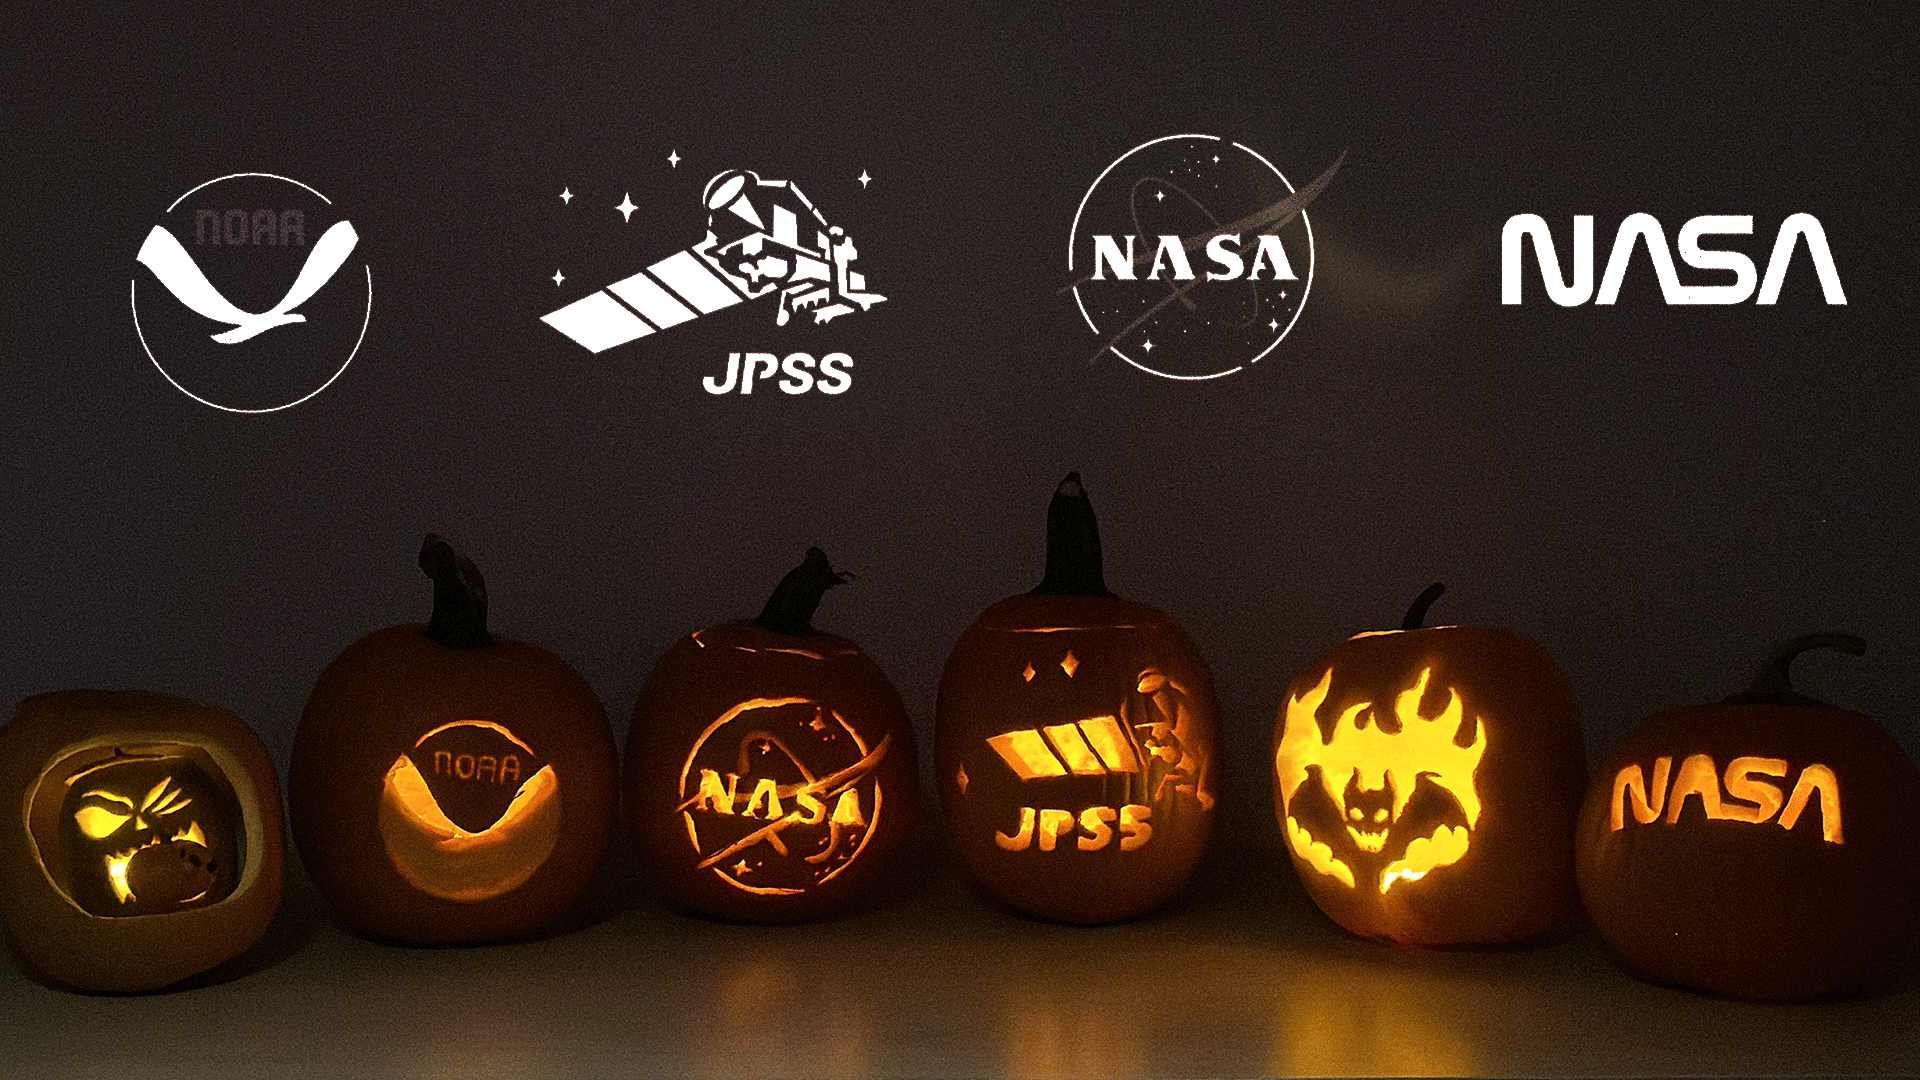 Carved pumpkins flickering in a dark room, with logos of NOAA, JPSS, and NASA above.